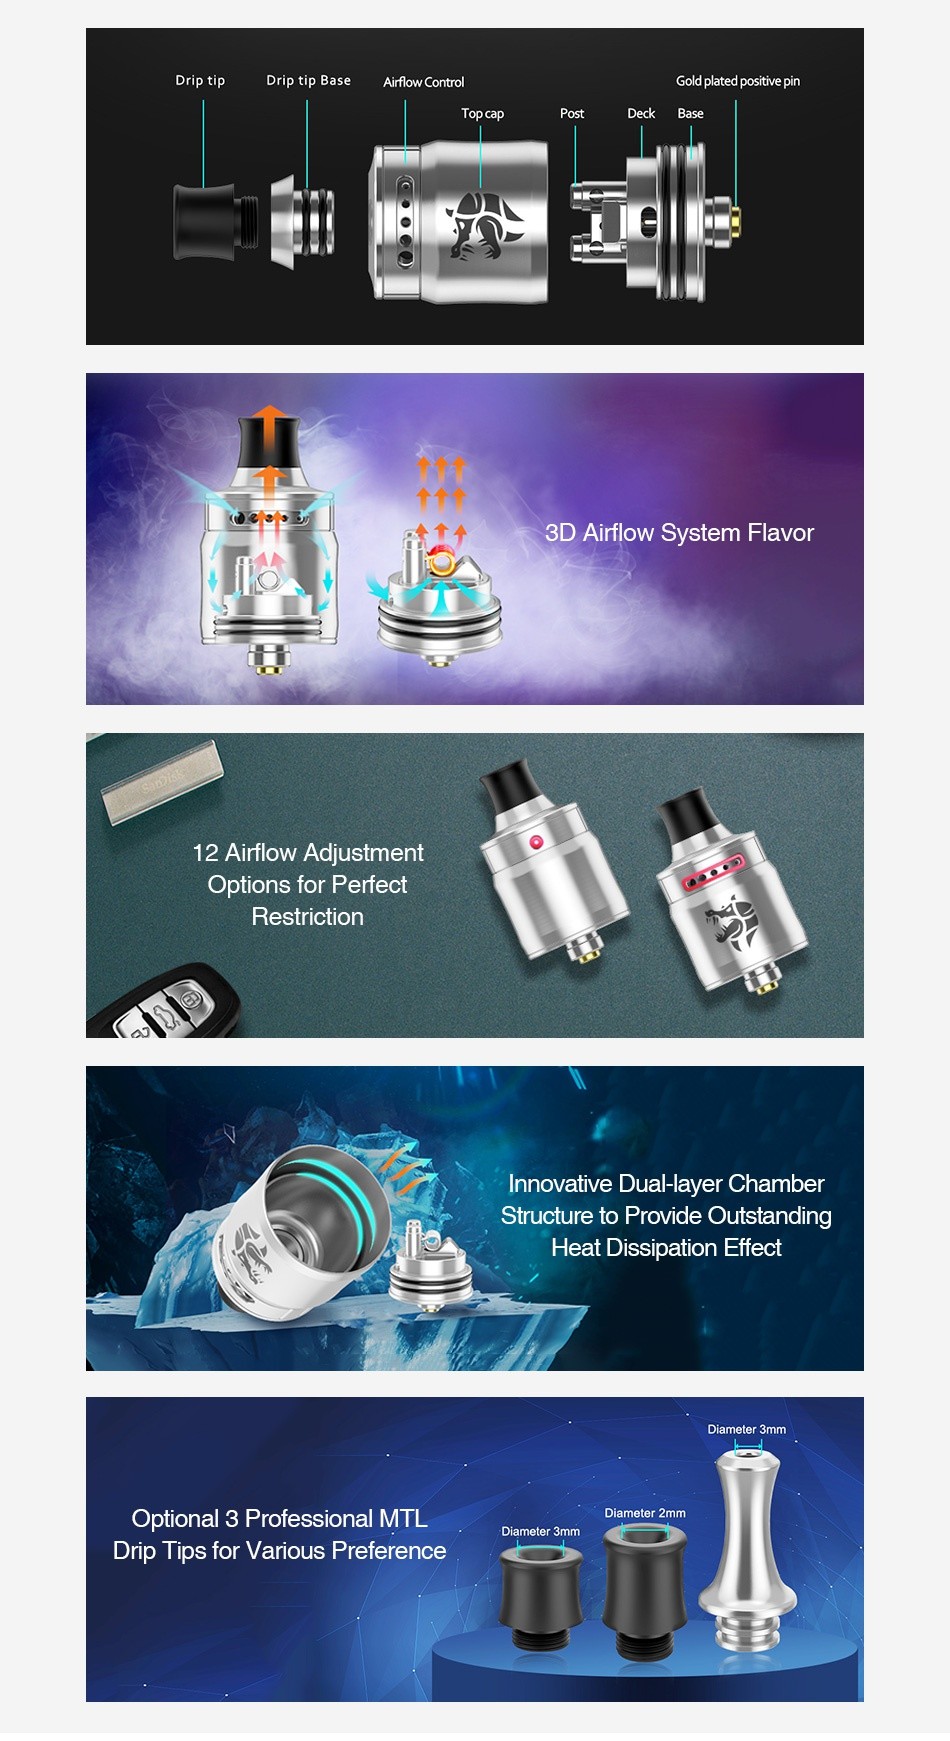 GeekVape Ammit MTL RDA Drip tip B Top cap     3D Airflow System Flavor 12 Airflow Adjustment Options for Perfect Restriction Innovative Dual layer Chamber Structure to Provide Outstanding Heat Dissipation Effect Diameter 3mm Optional 3 Professional MTL Diameter 3mm Drip Tips for Various Preference